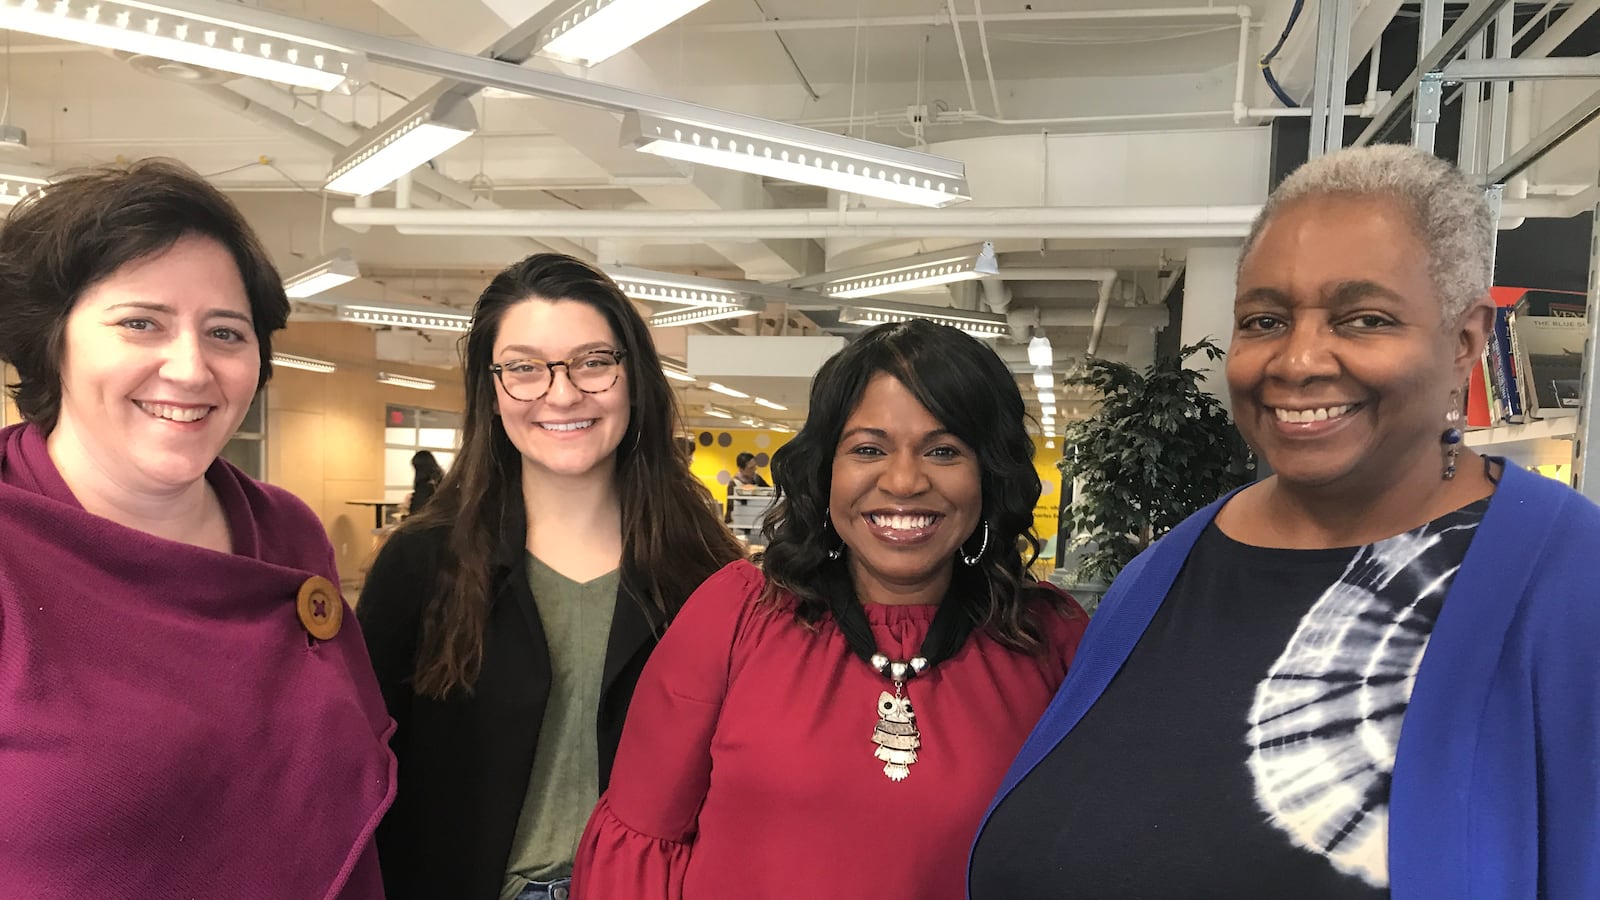 The Chalkbeat Detroit team has expanded to include bureau chief Erin Einhorn, reporting fellow Amanda Rahn, senior reporter Kimberly Hayes Taylor and editor Julie Topping.